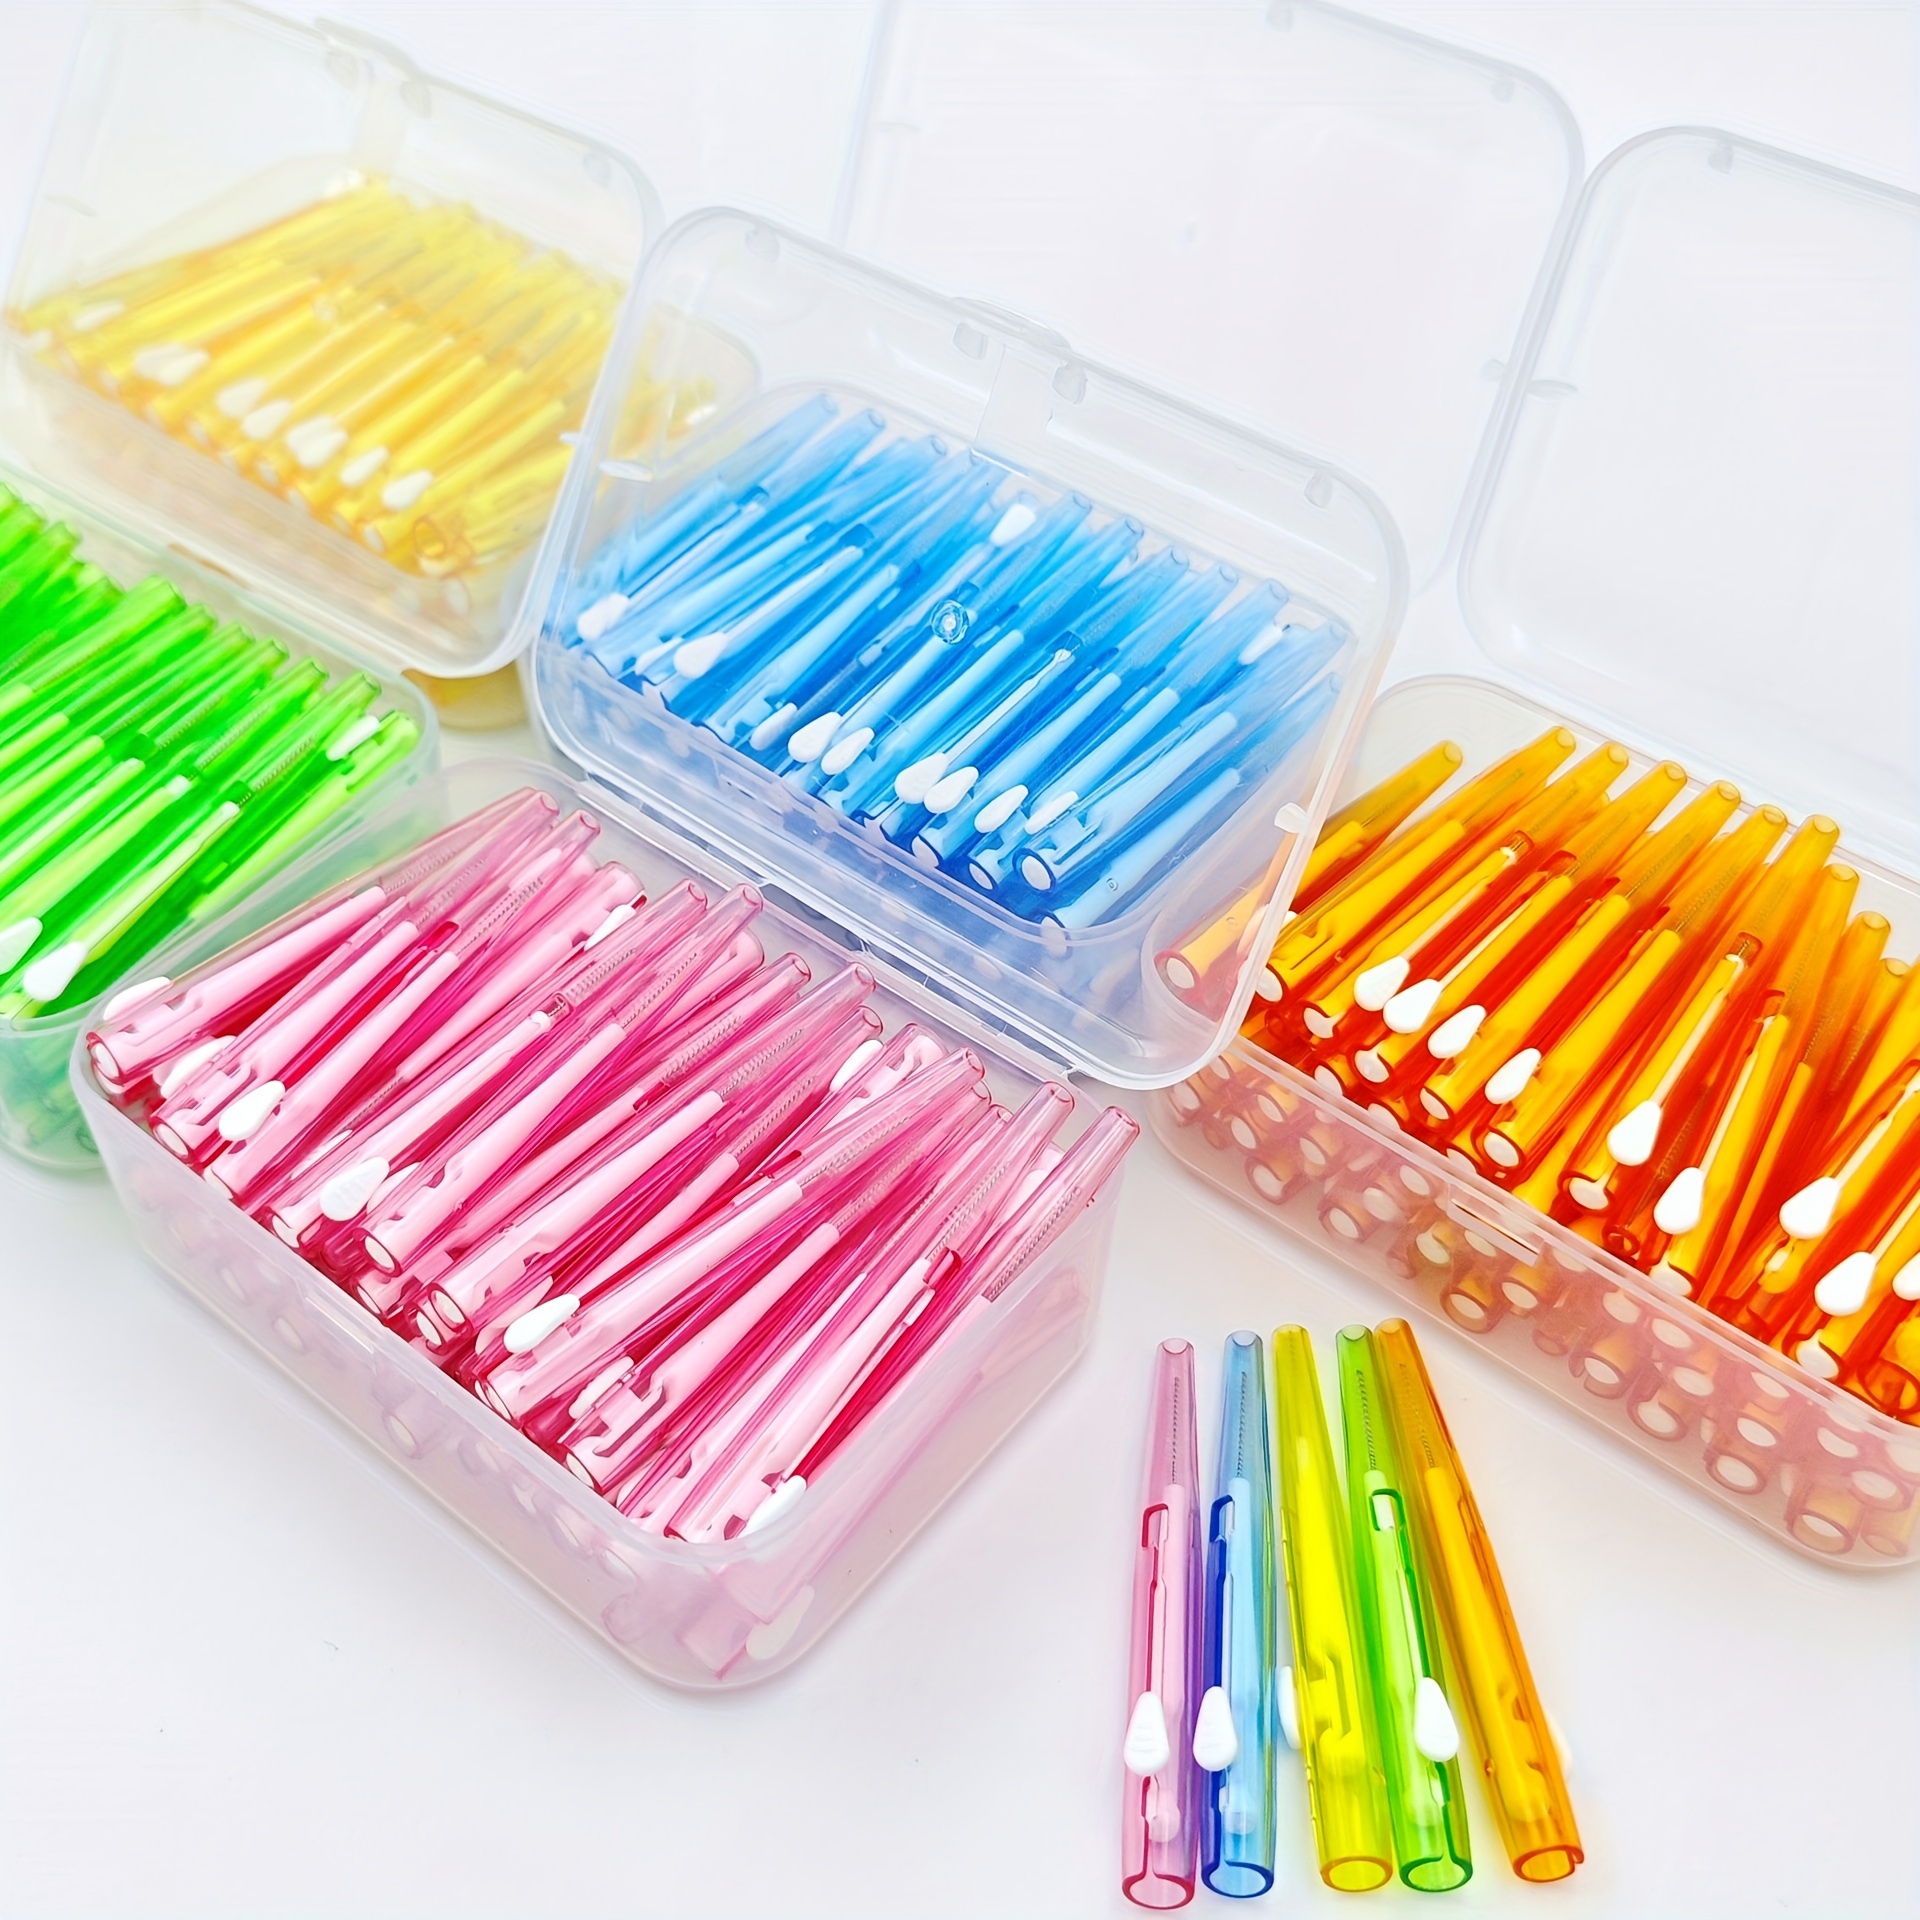 

Portable Interdental Brushes, Push-pull Design, Multi-color, Travel-friendly Oral Dental Picks, Teeth Cleaning, Braces Care, Teeth Hygiene Accessories With Storage Case Travel Must Have